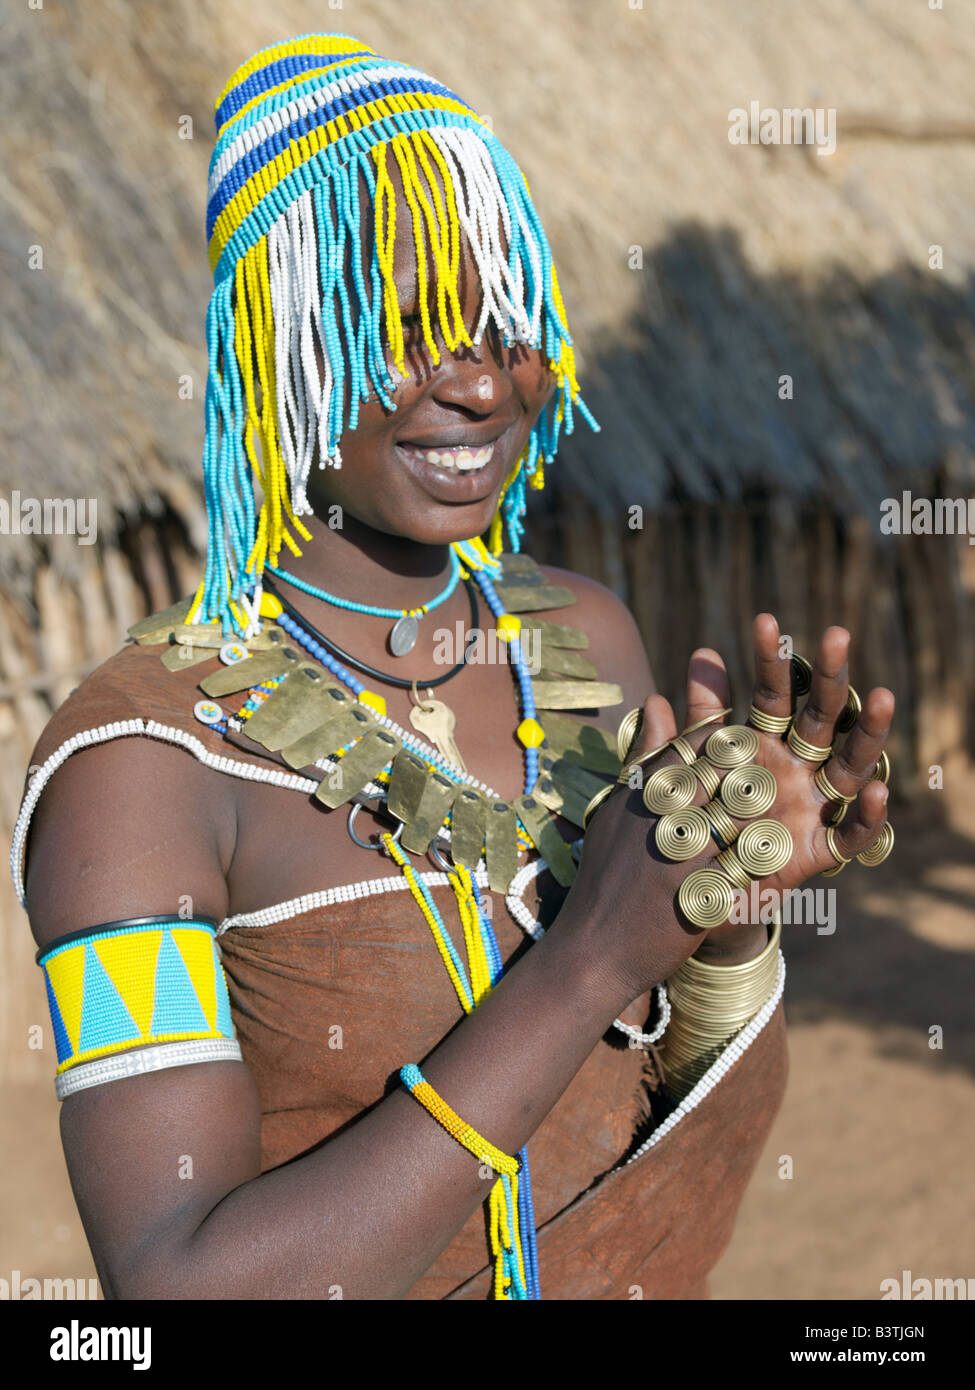 Tanzania, Northern Tanzania, Balangida Lelu. A Datoga woman with a beaded hat worn on ceremonial occasions. The traditional attire of Datoga women includes beautifully tanned and decorated leather dresses and coiled brass armbands, necklaces and rings. Yellow and light blue are the preferred colours of the beads they wear. Scarification of the face is not uncommon among women and girls.The Datoga (known to their Maasai neighbours as the Mang'ati and to the Iraqw as Babaraig) live in northern Tanzania and are primarily pastoralists. Stock Photo